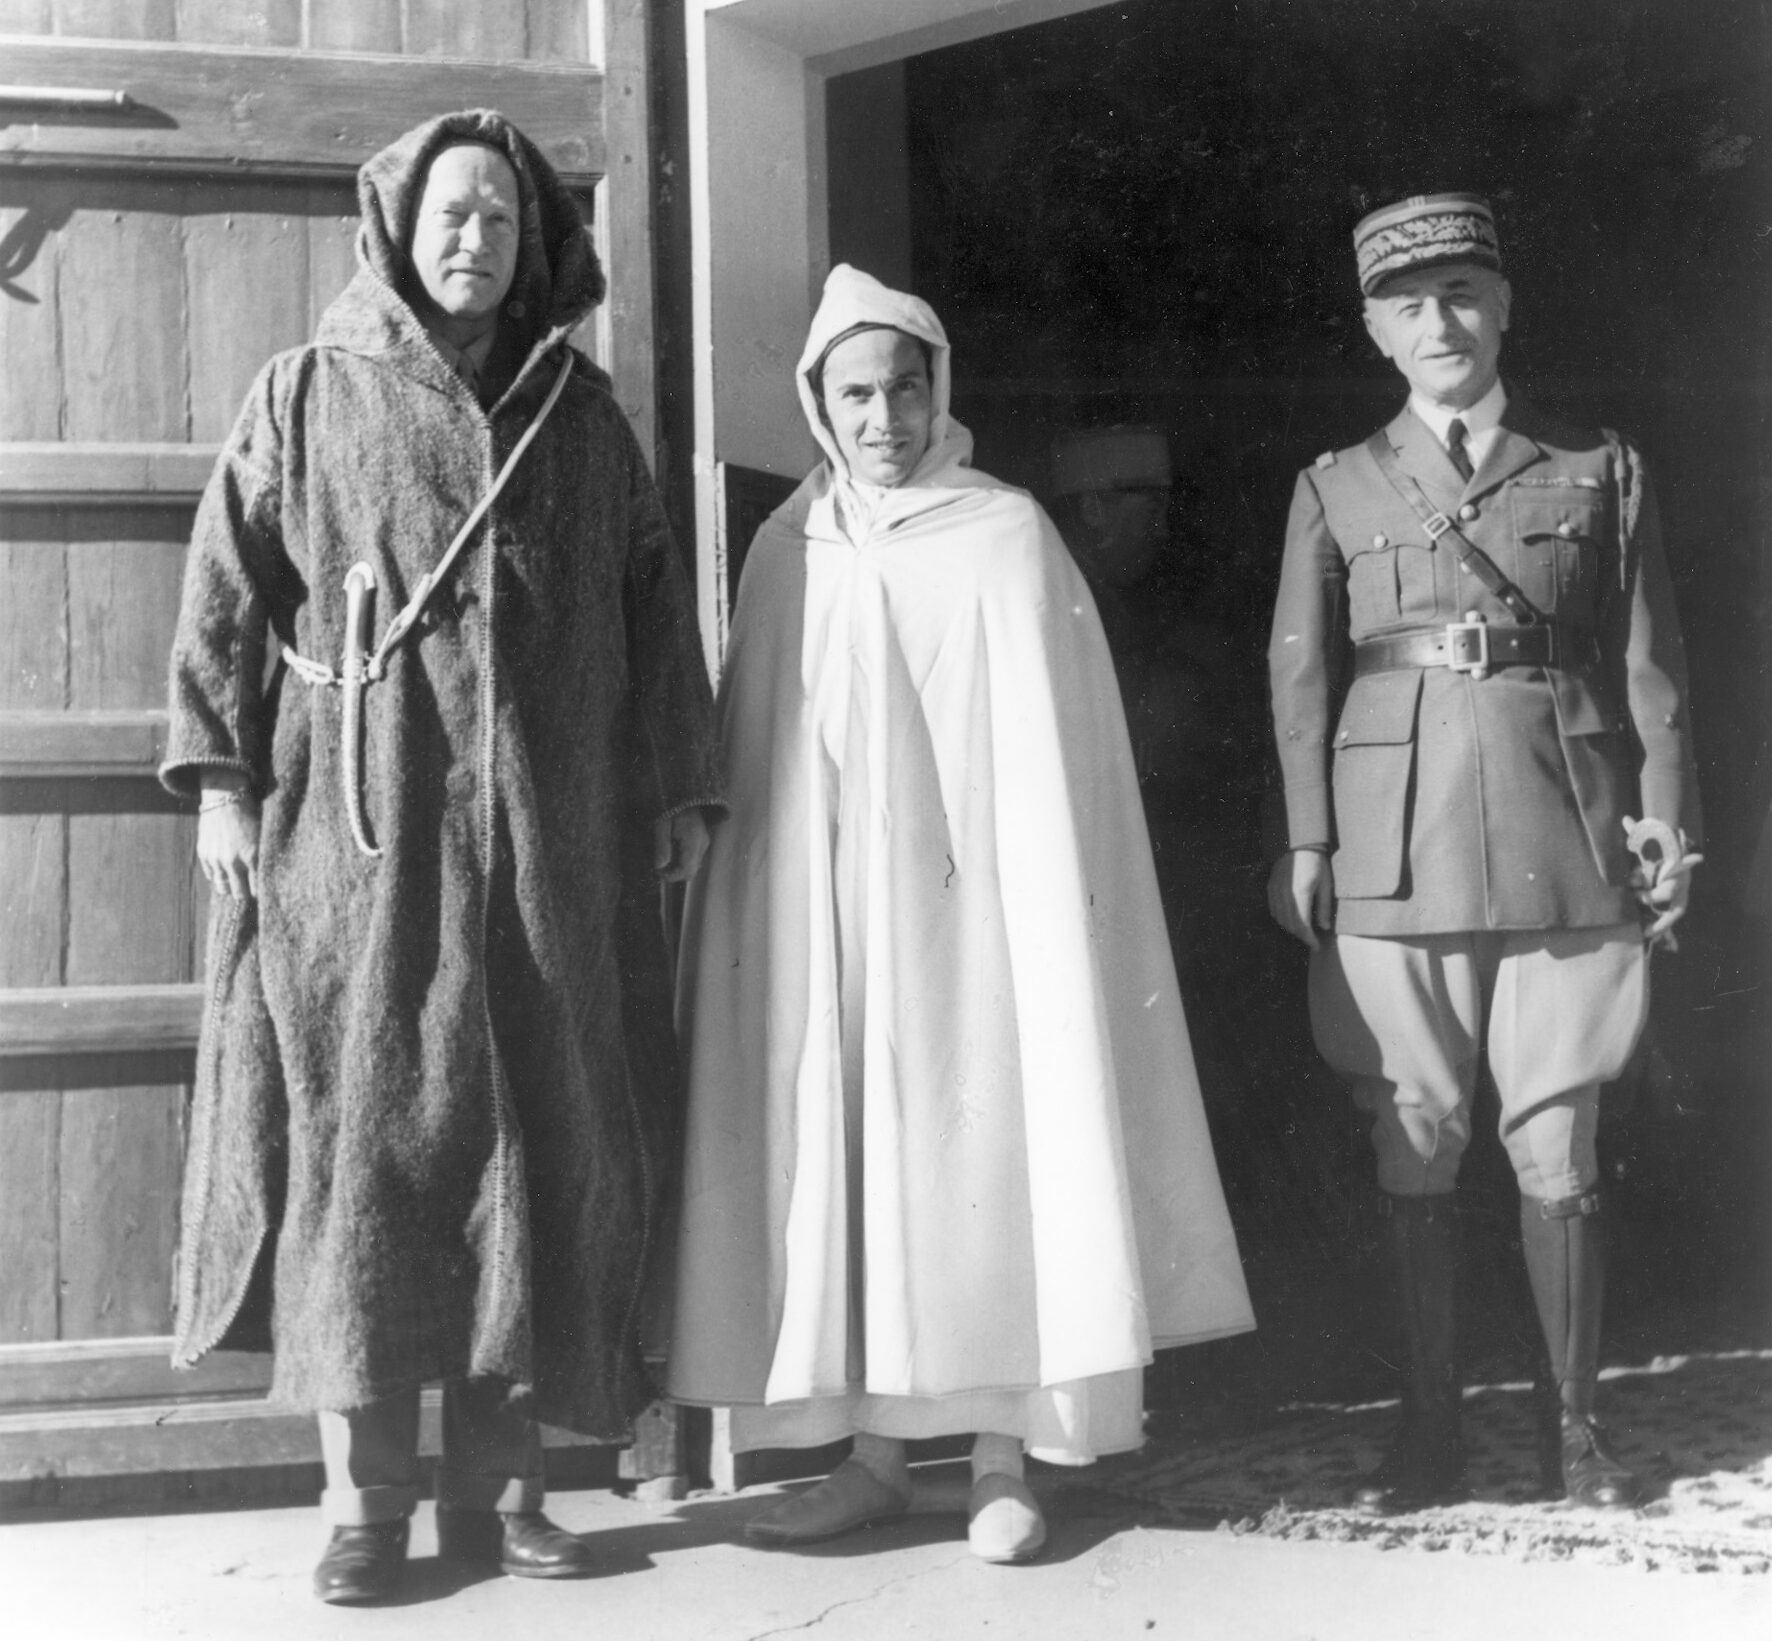 Patton, dressed in African robes with a solid gold scabbard, poses with the Pasha of Morocco and General A.P.C. Nogues, the French commander in Morocco. “This is a great country for photography,” he wrote Beatrice, “as everything is queer. You meet camels, burros, horses, and Arabs on the same road with tanks and self-propelled artillery.”